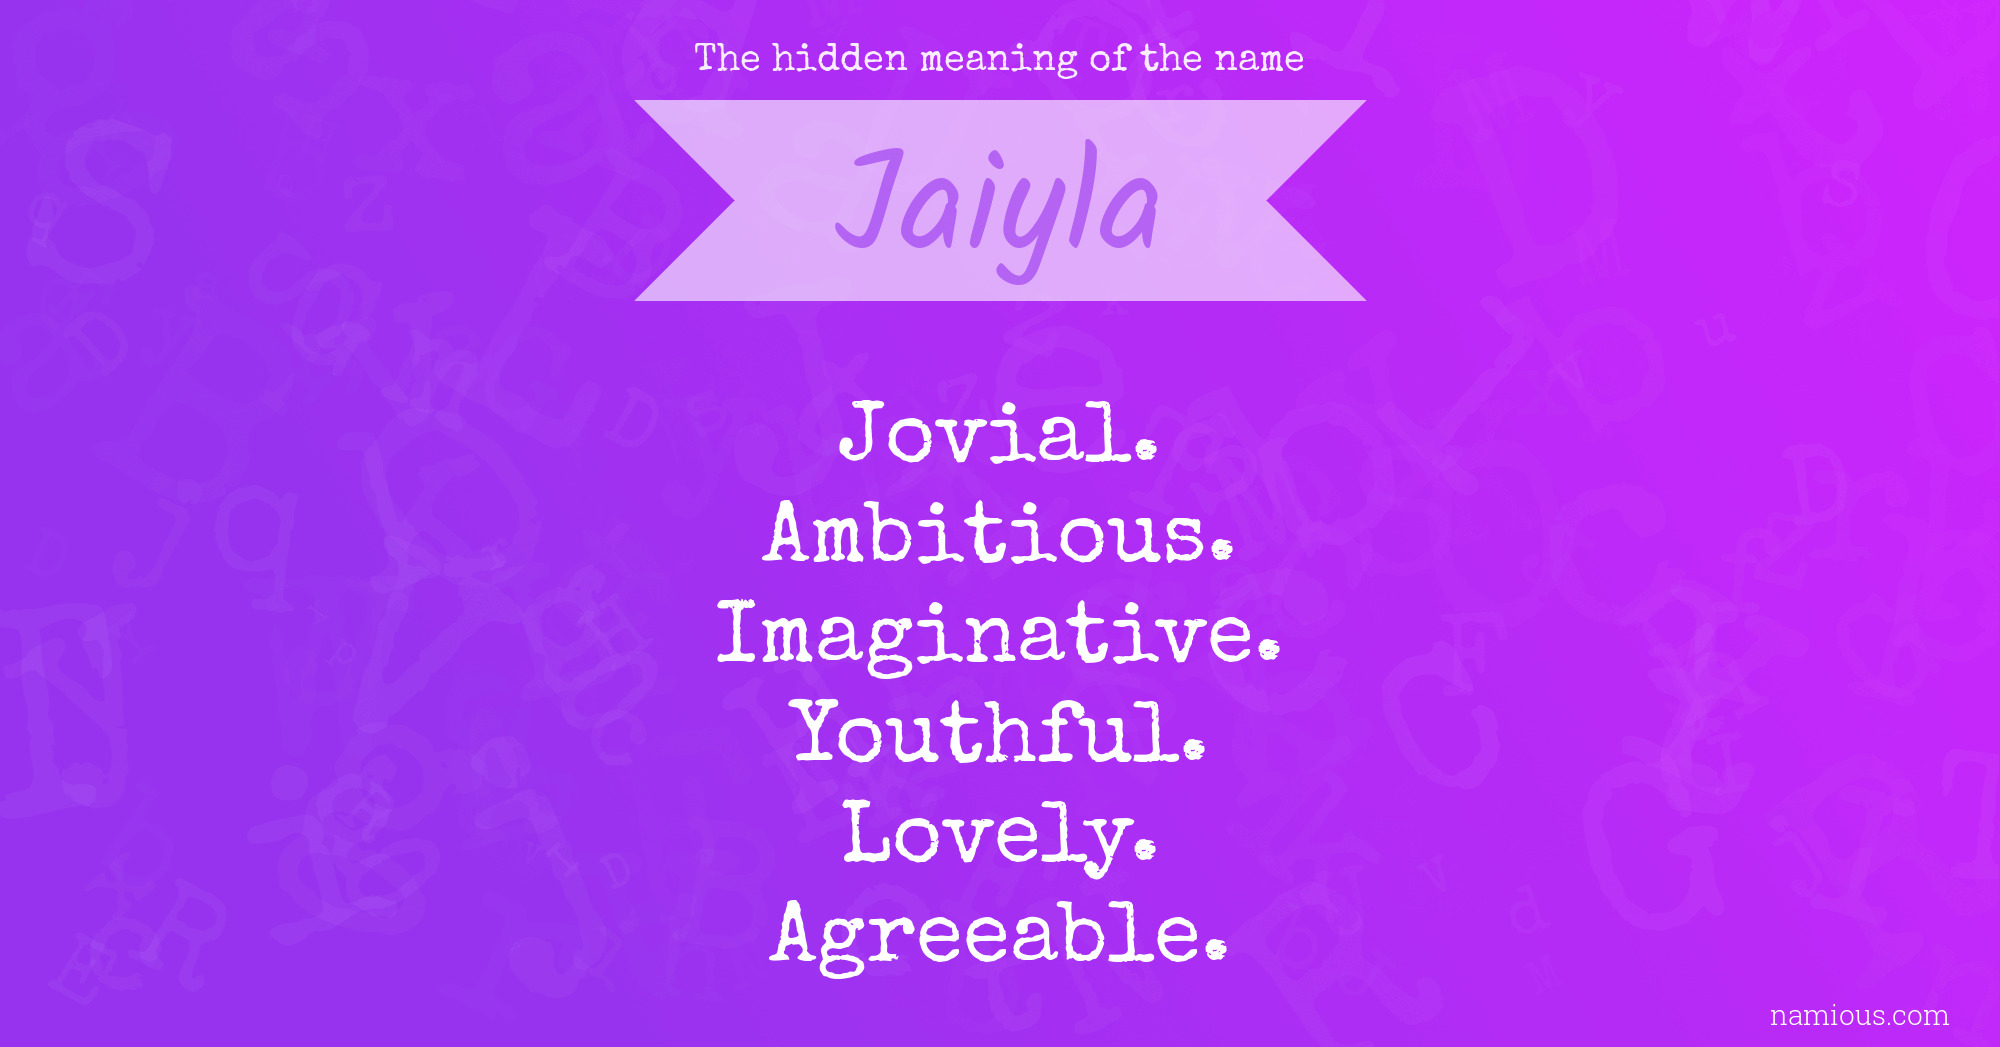 The hidden meaning of the name Jaiyla